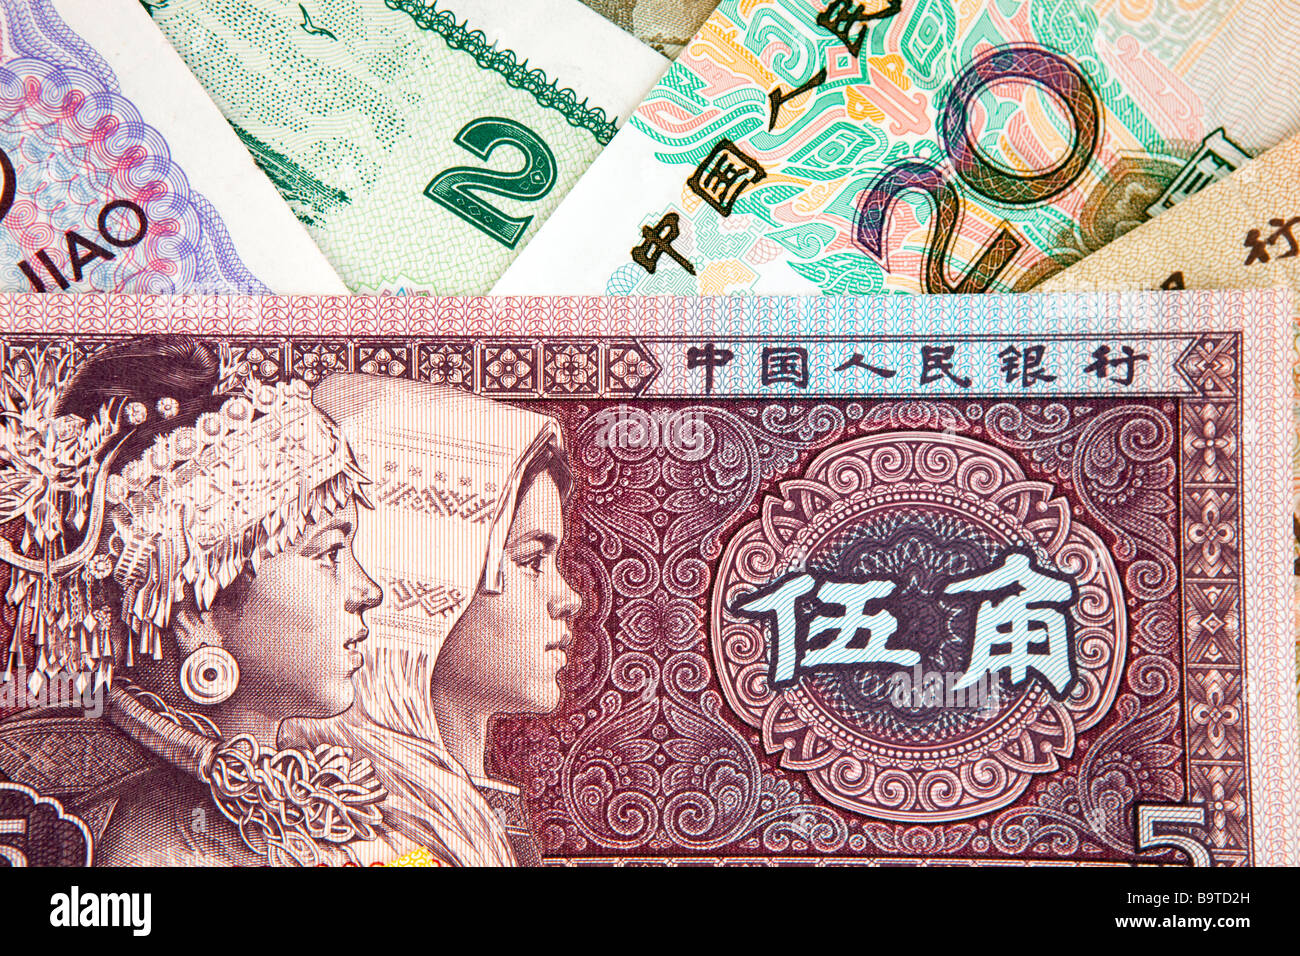 Money currency detail of Chinese banknotes Stock Photo